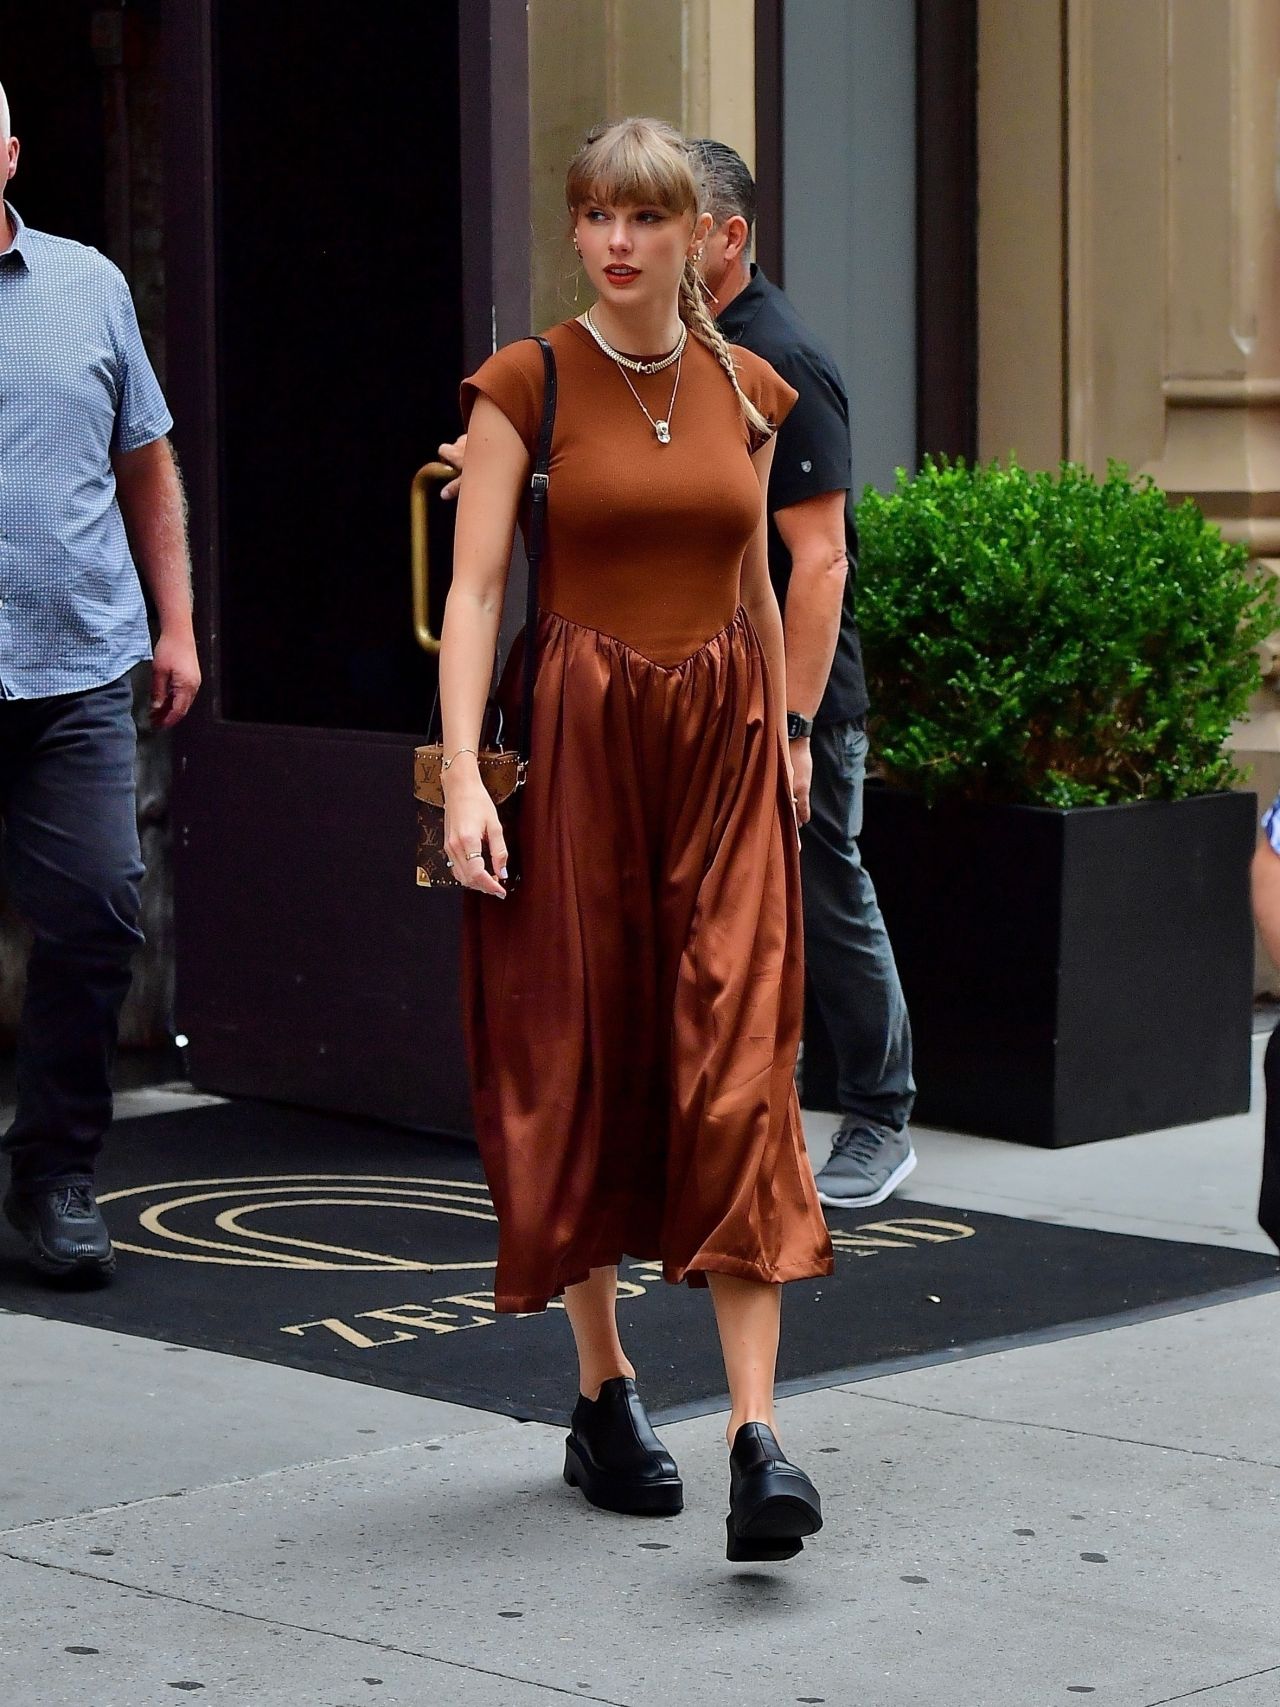 Louis Vuitton Camera Box Bag worn by Taylor Swift Out in New York